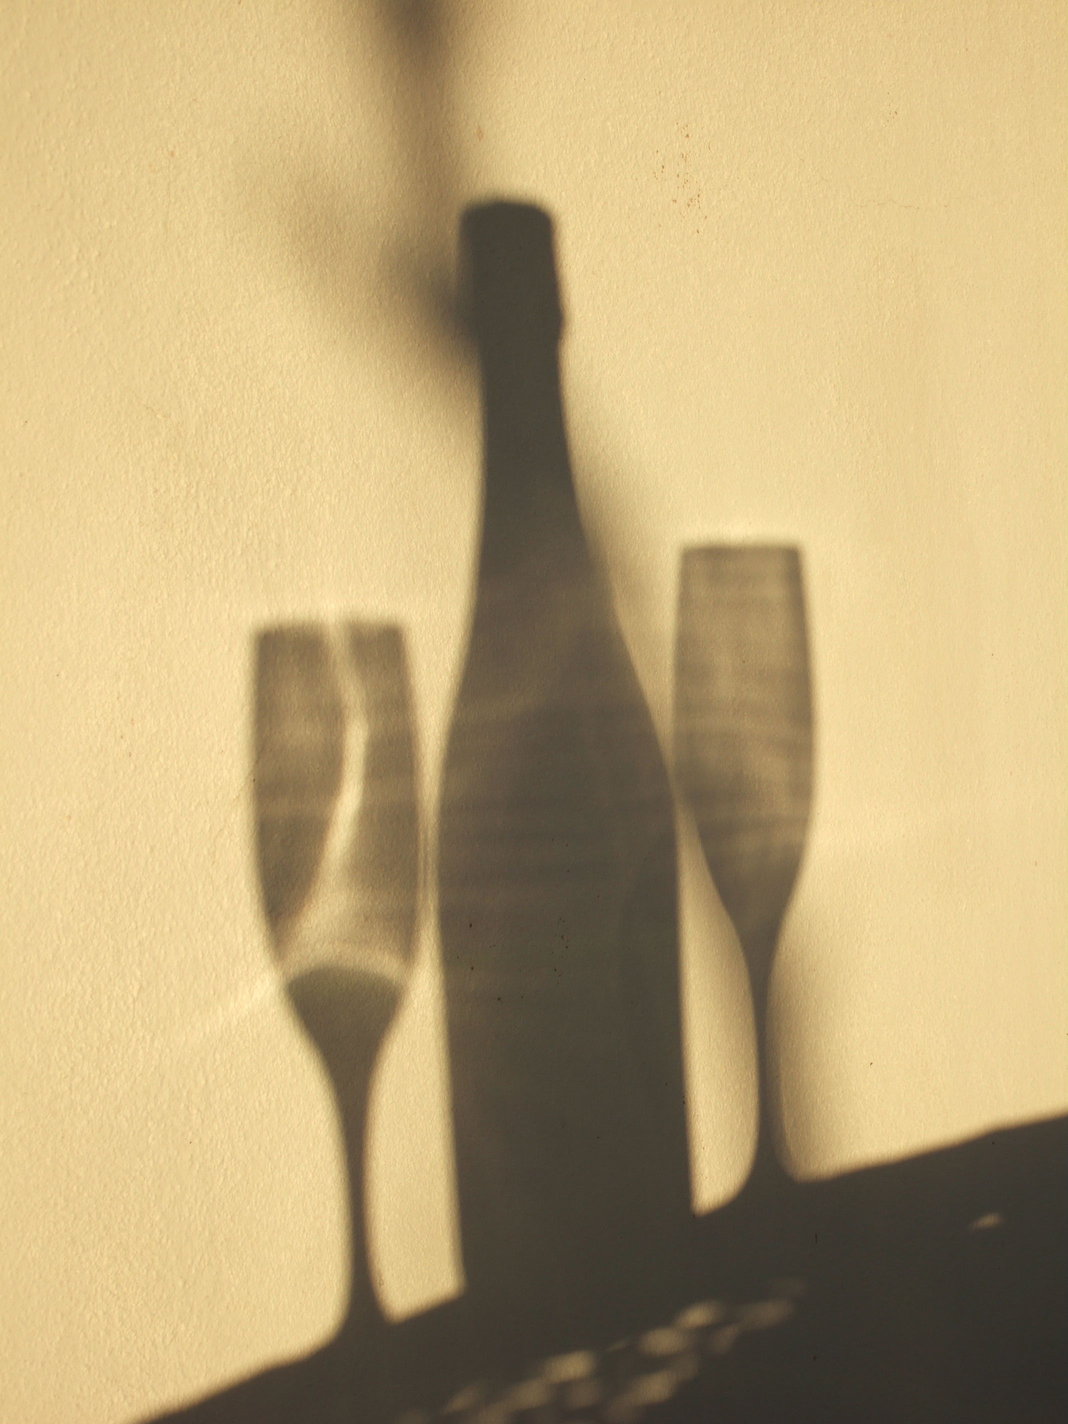 Champagne Time - Objects, Champagne | Wine | Drink | Evening | Love | Shadow